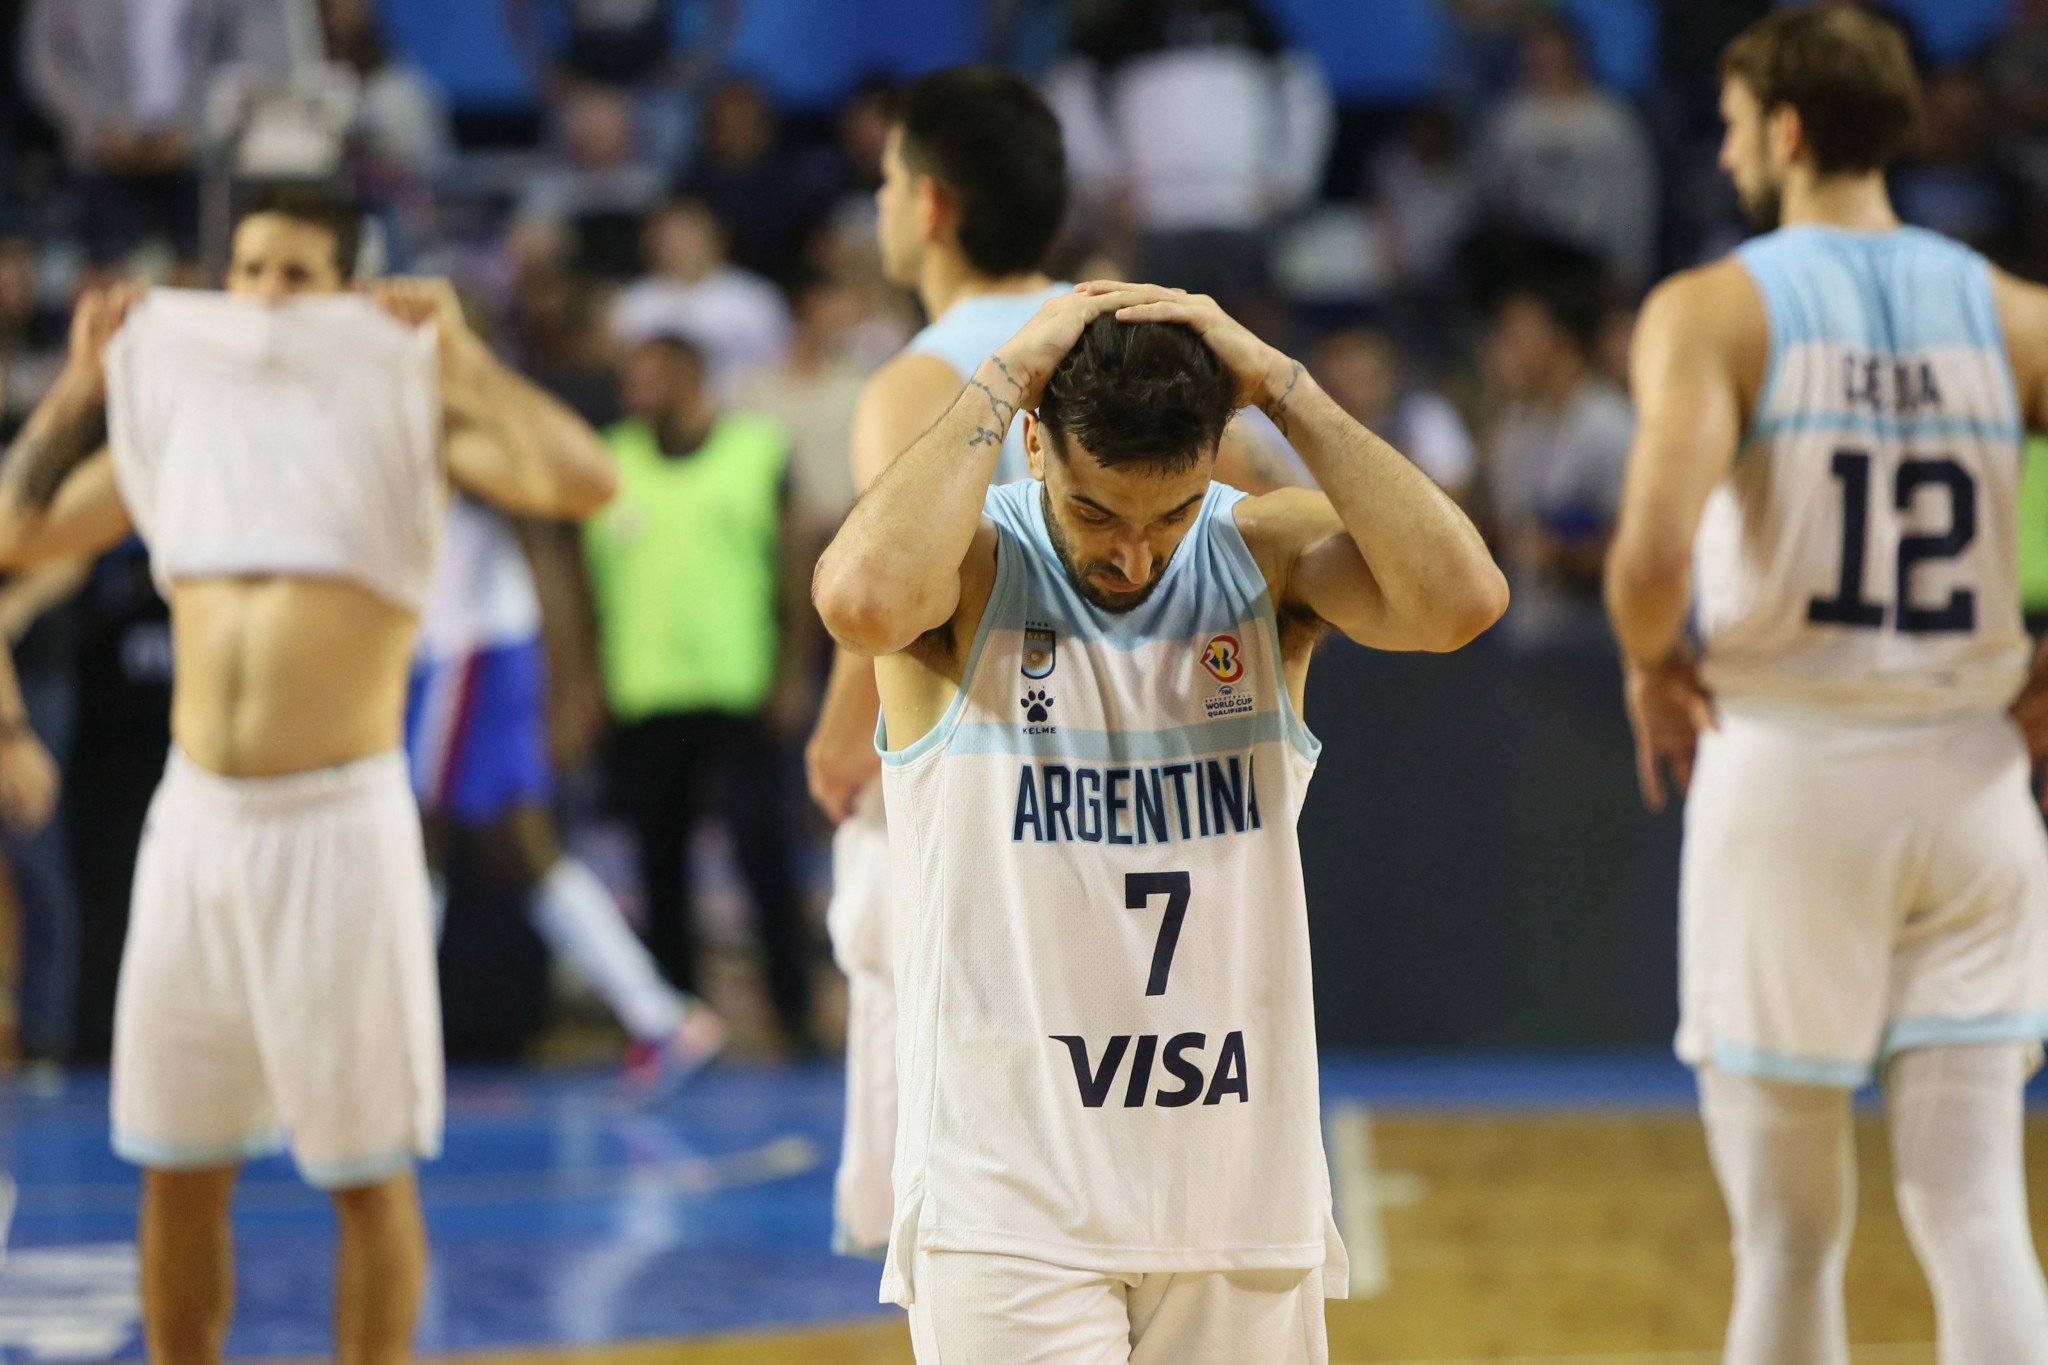 Argentina fail to qualify for men's Basketball World Cup for first time in more than 40 years